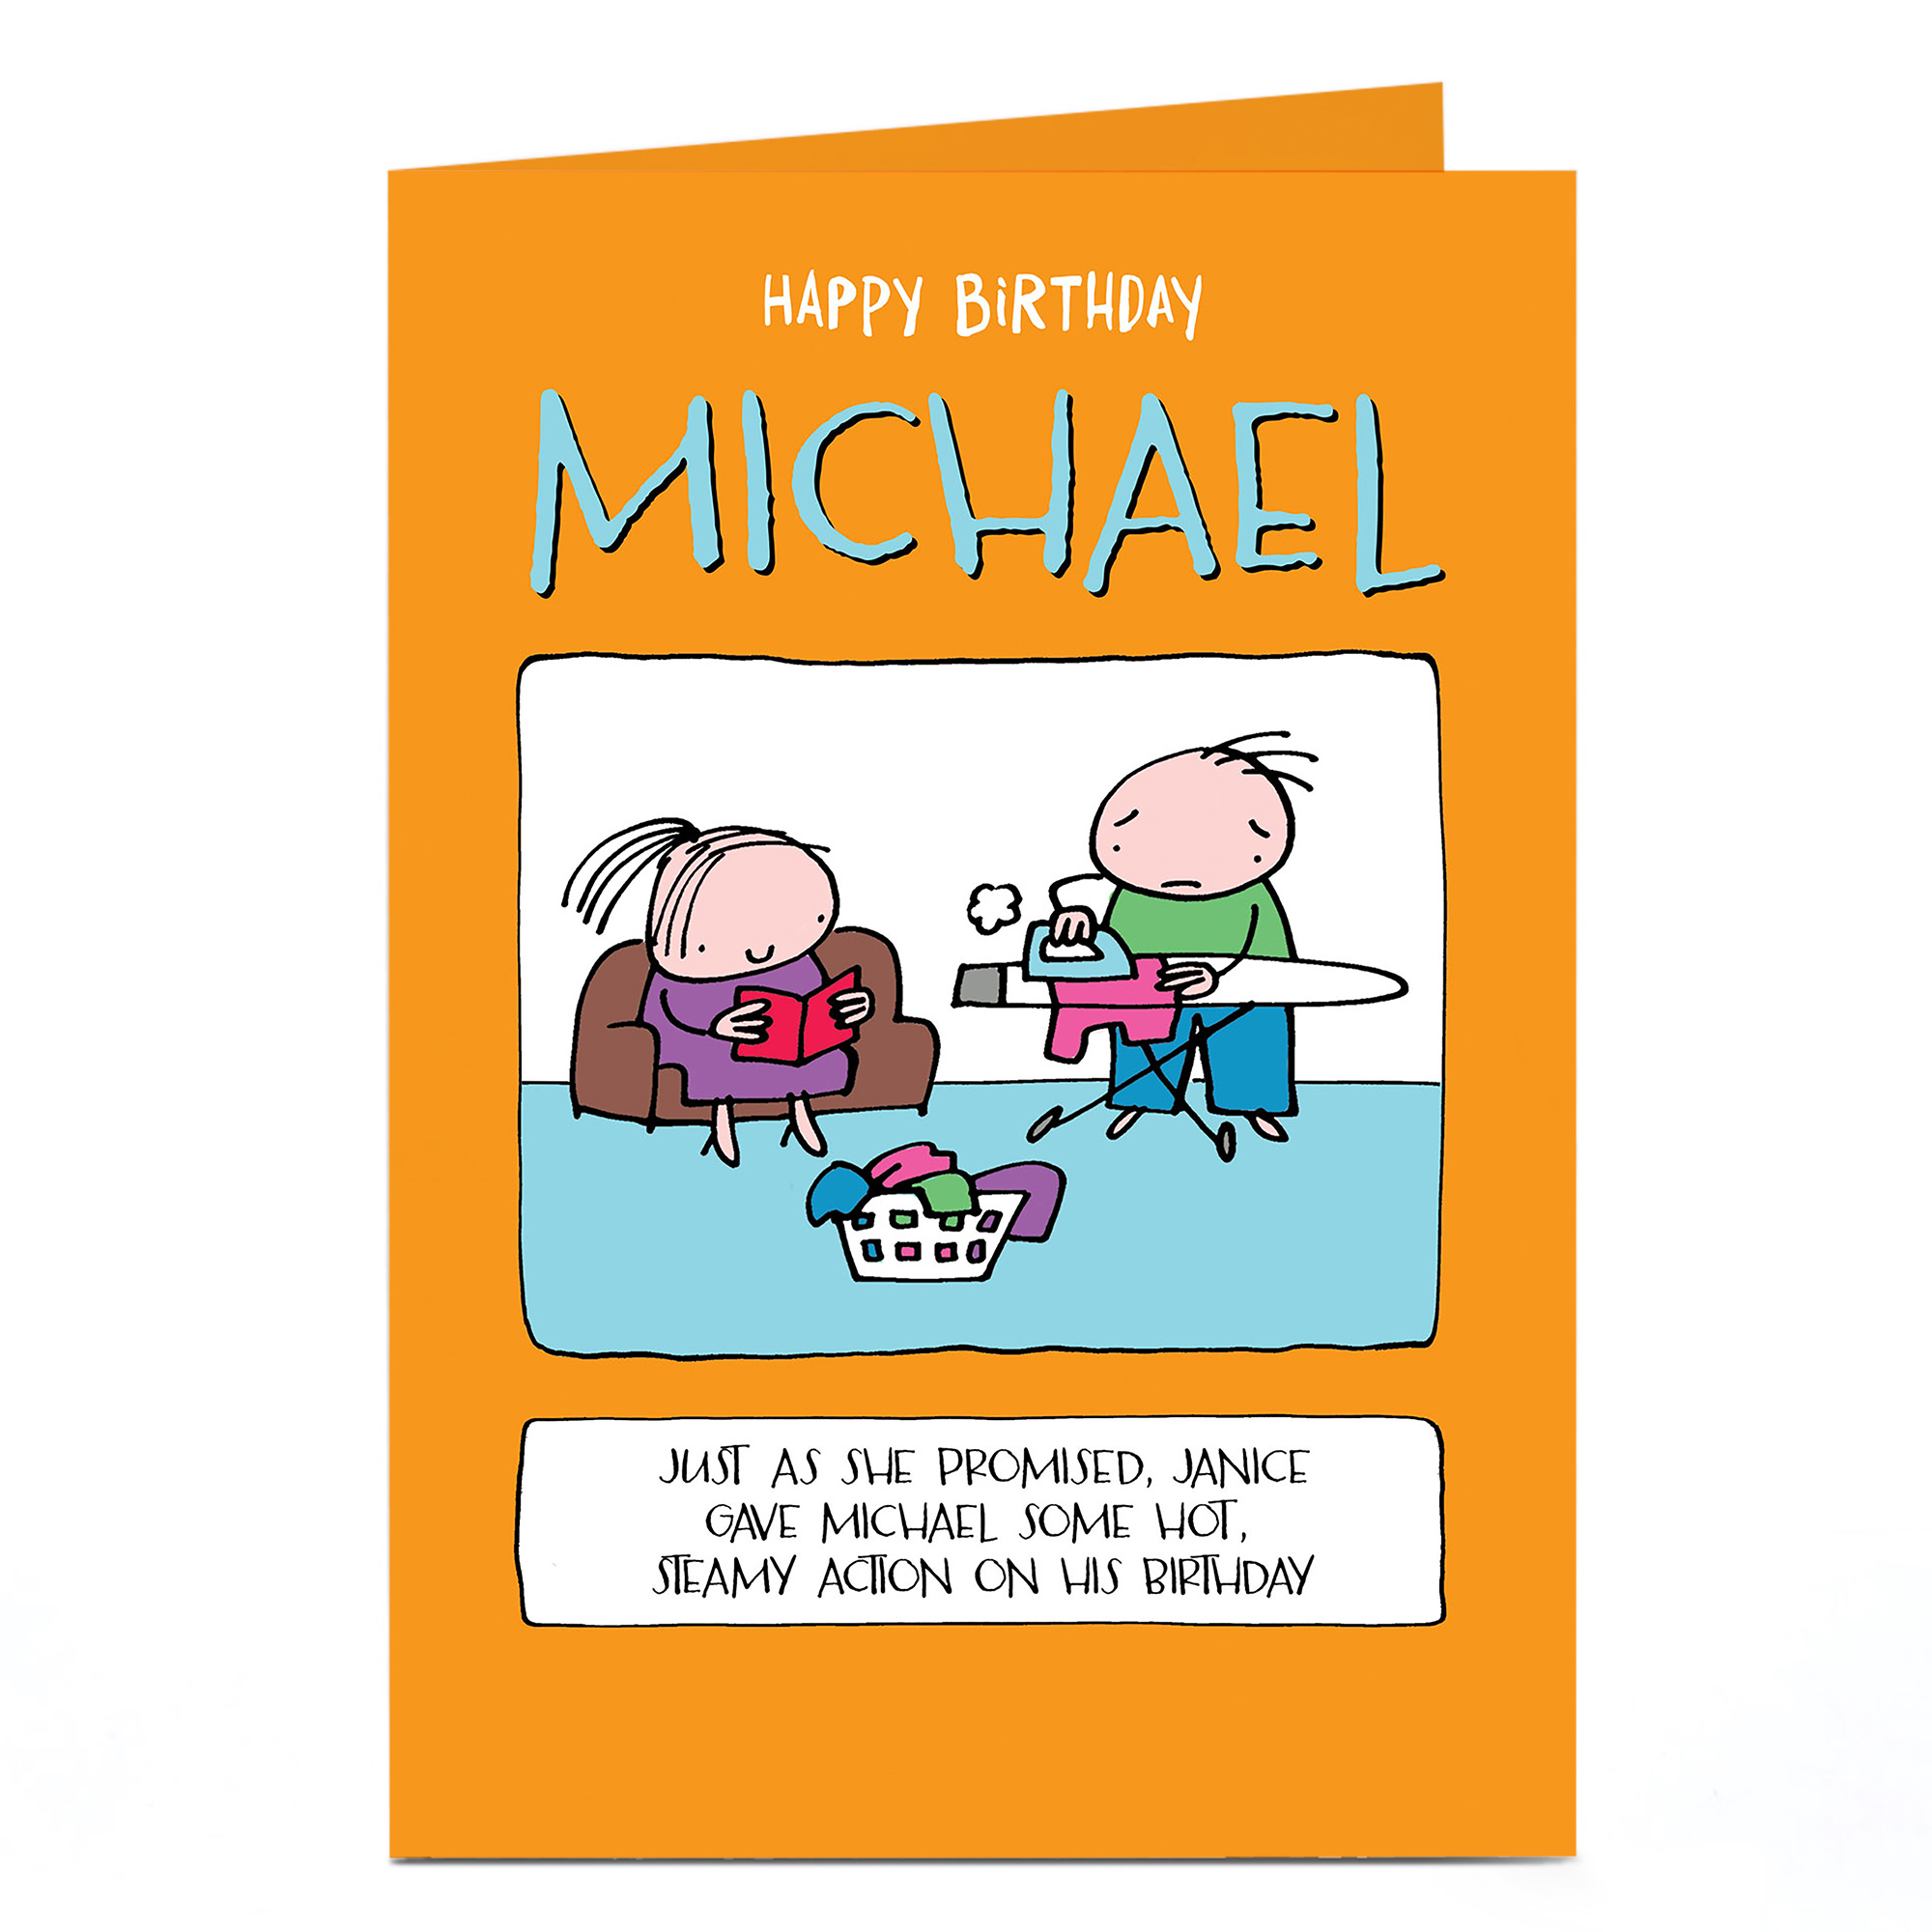 Personalised Birthday Card - Hot & Steamy Action Comic